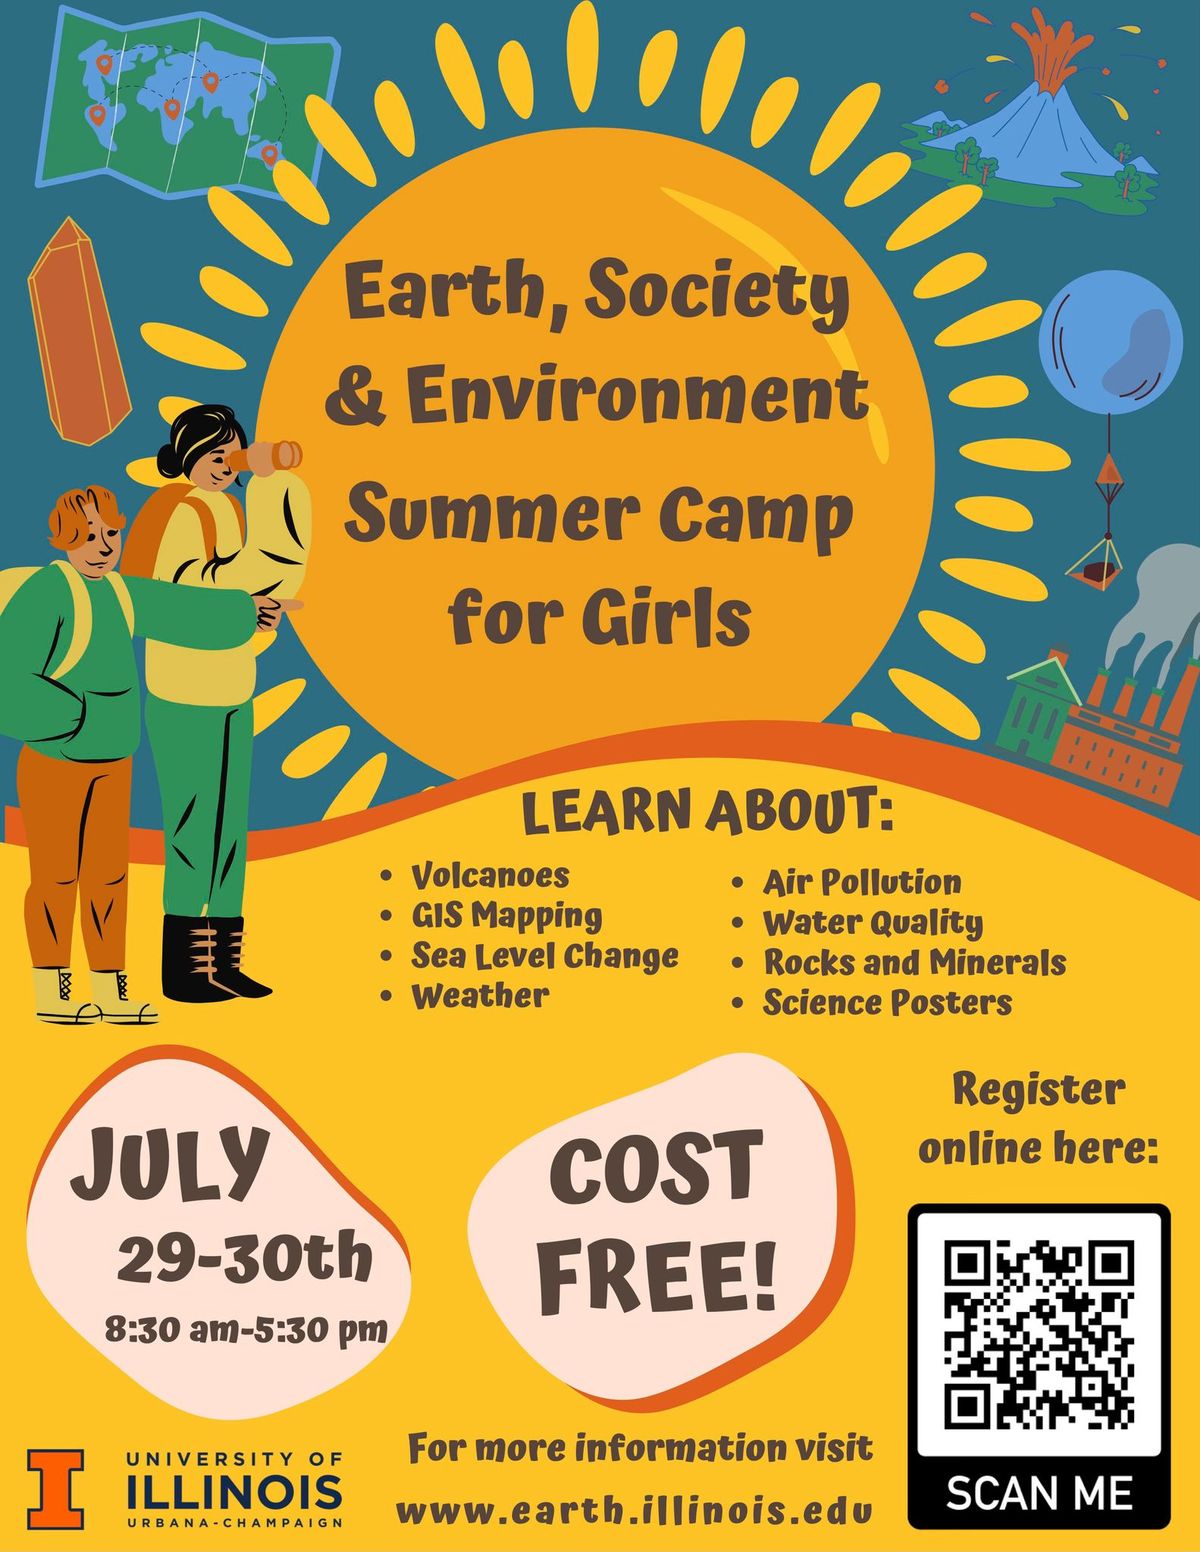 Earth, Society & Environment Summer Camp for Girls